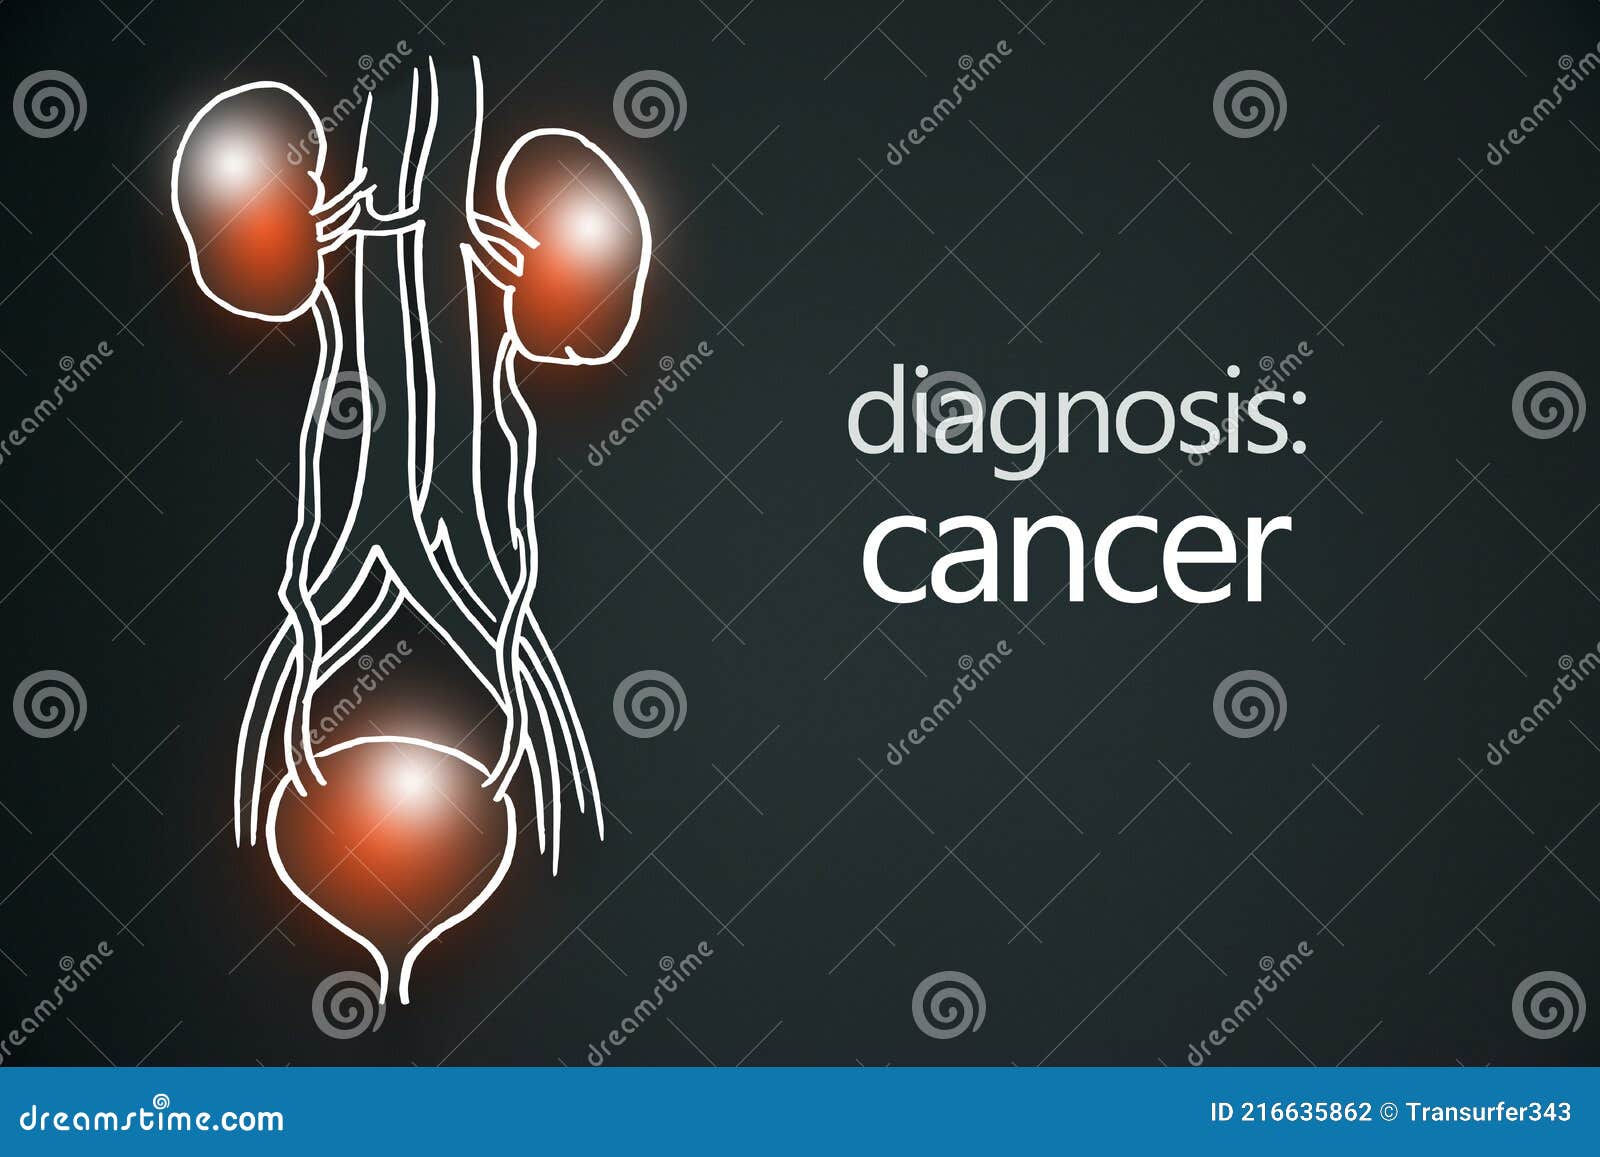 cancer kidney disease or renal cell carcinomas. malignant kidney tumors.